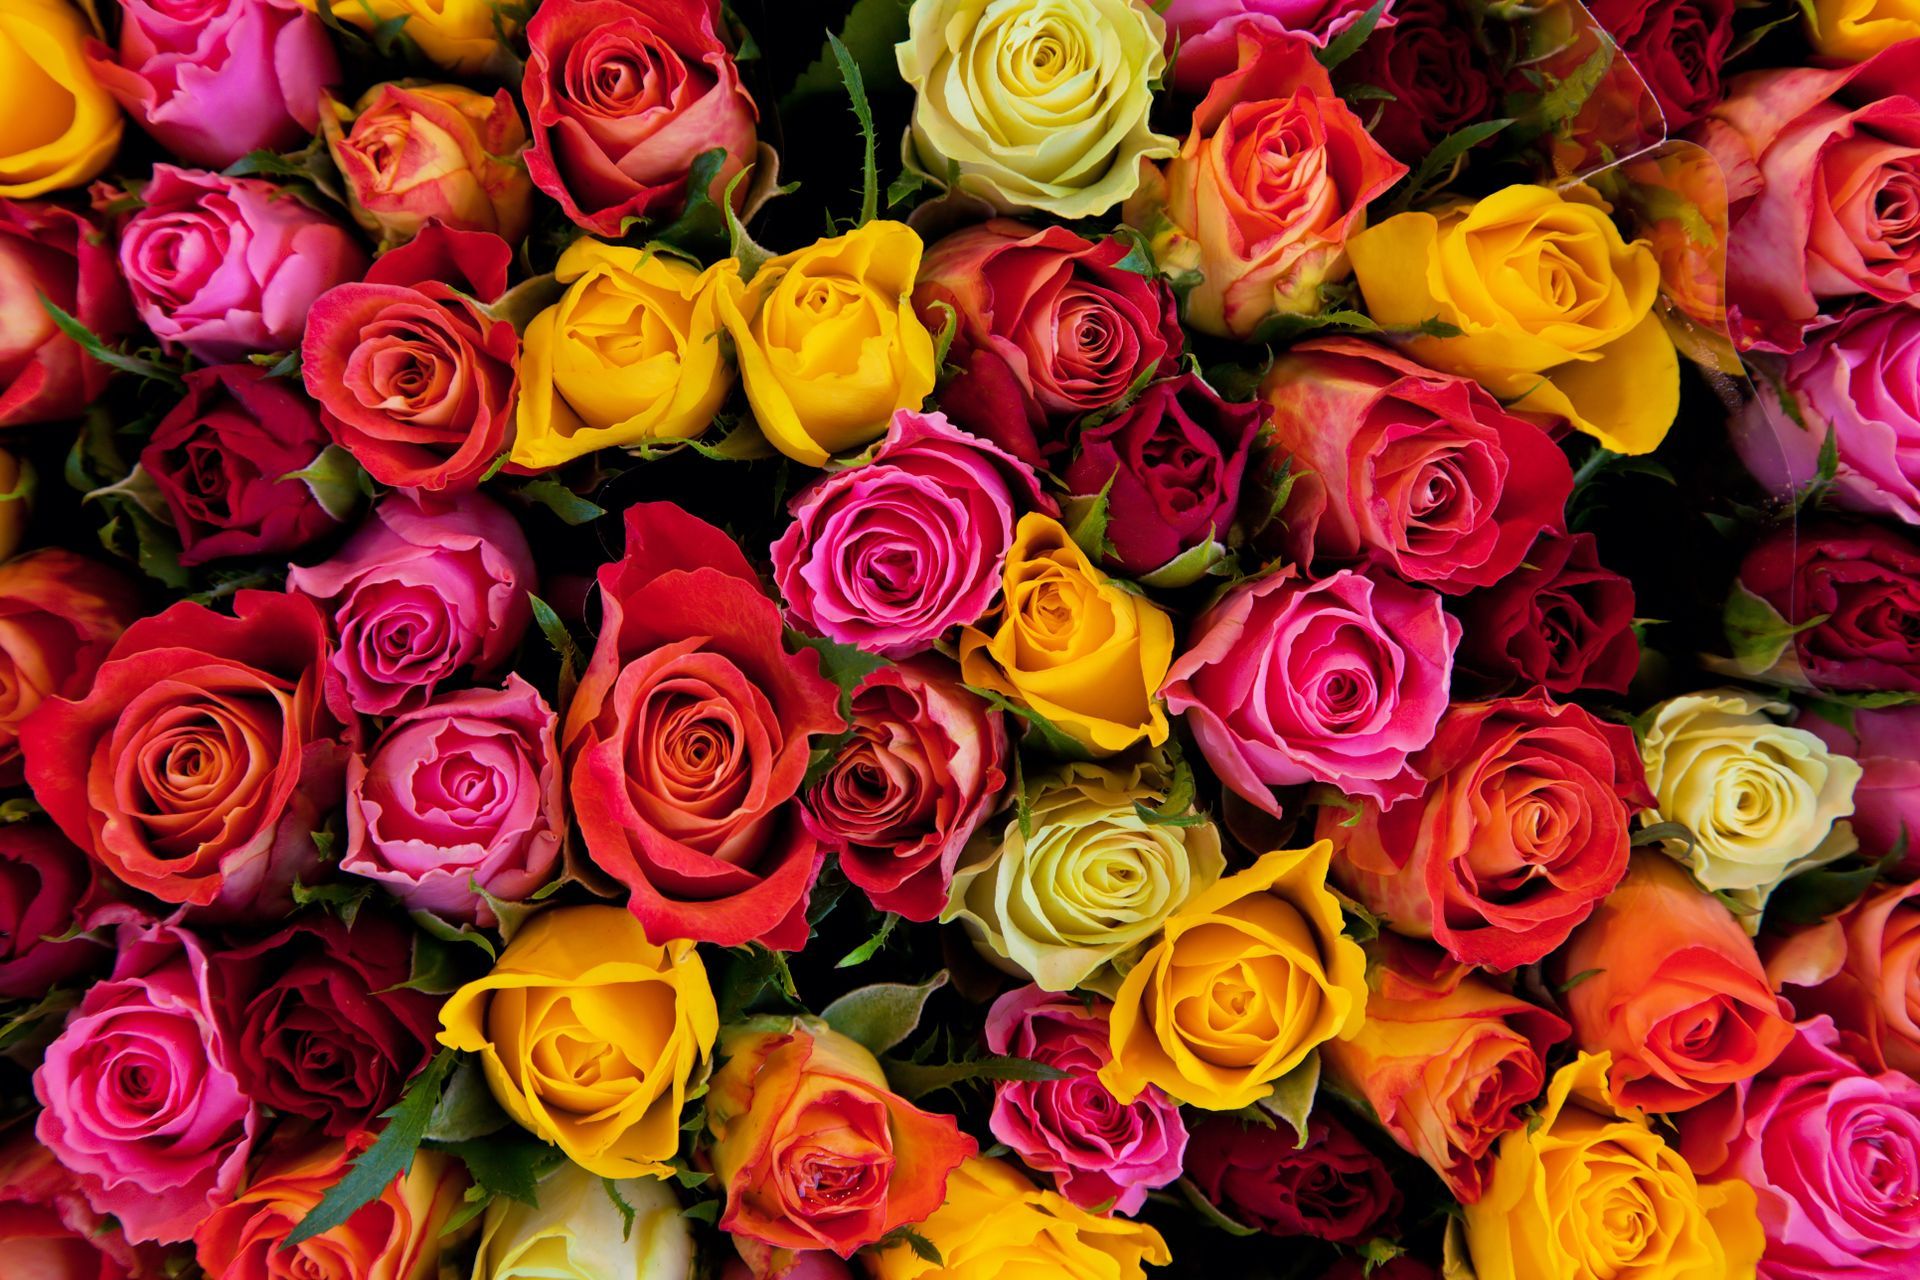 decorative images of roses